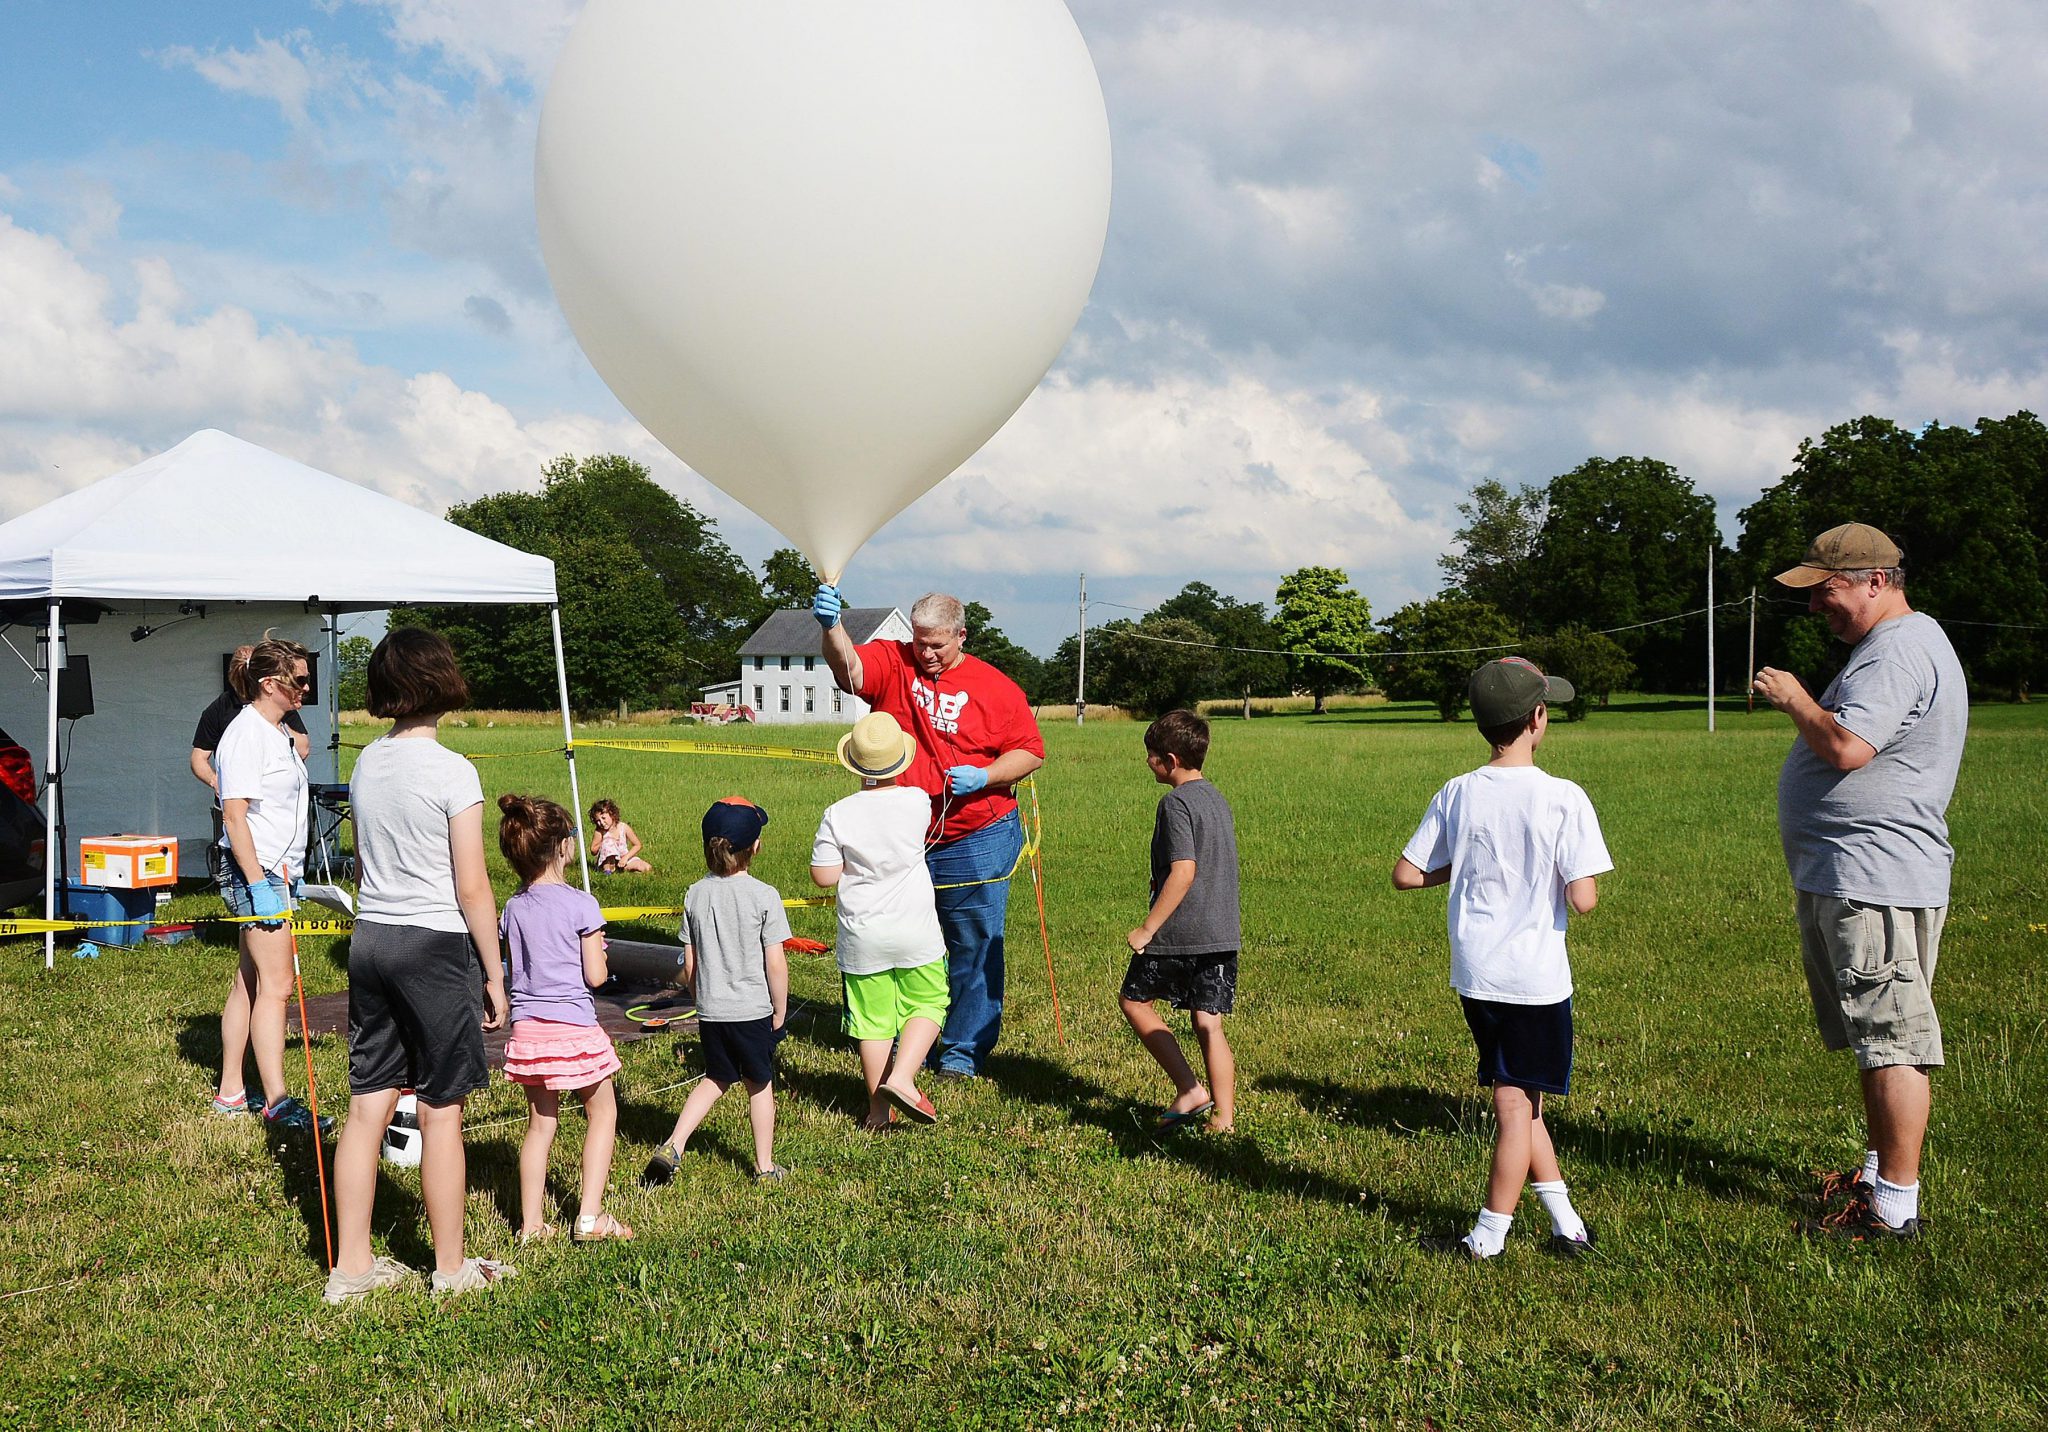 Kids enjoying our weather balloon launch operations!